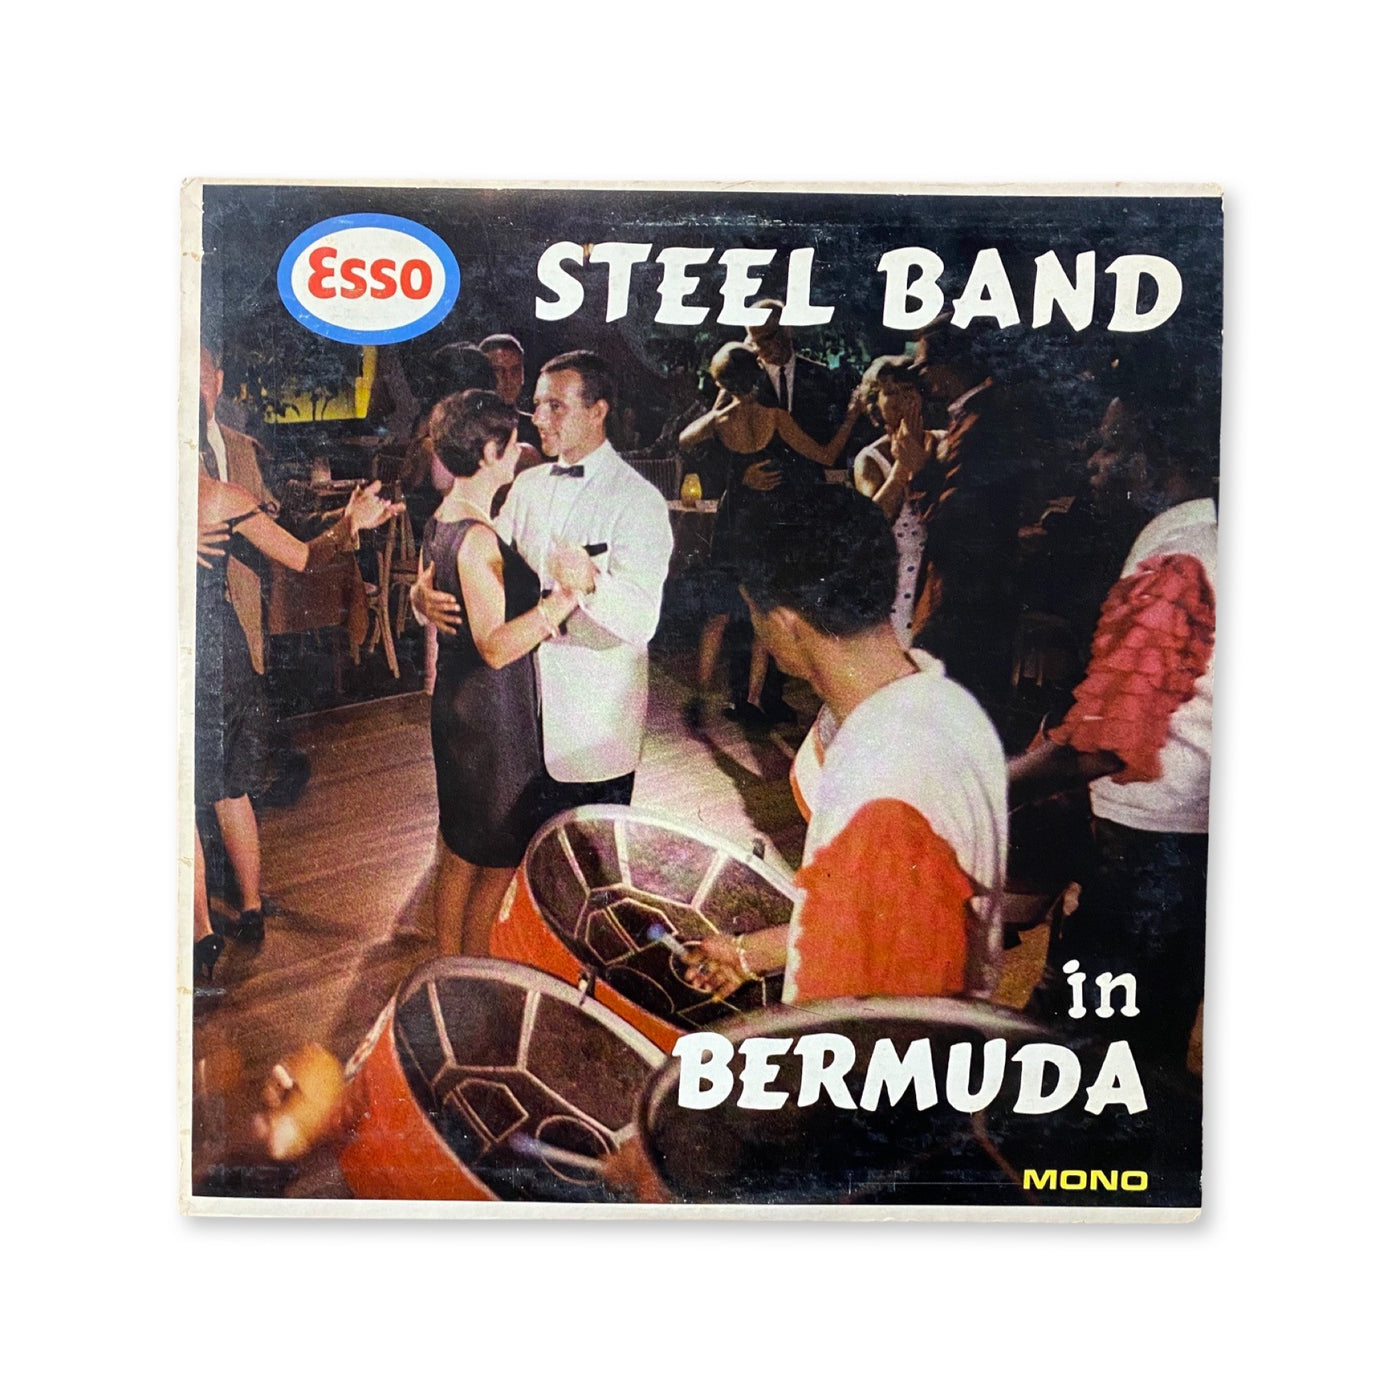 Esso Steel Band - Steel Band In Bermuda